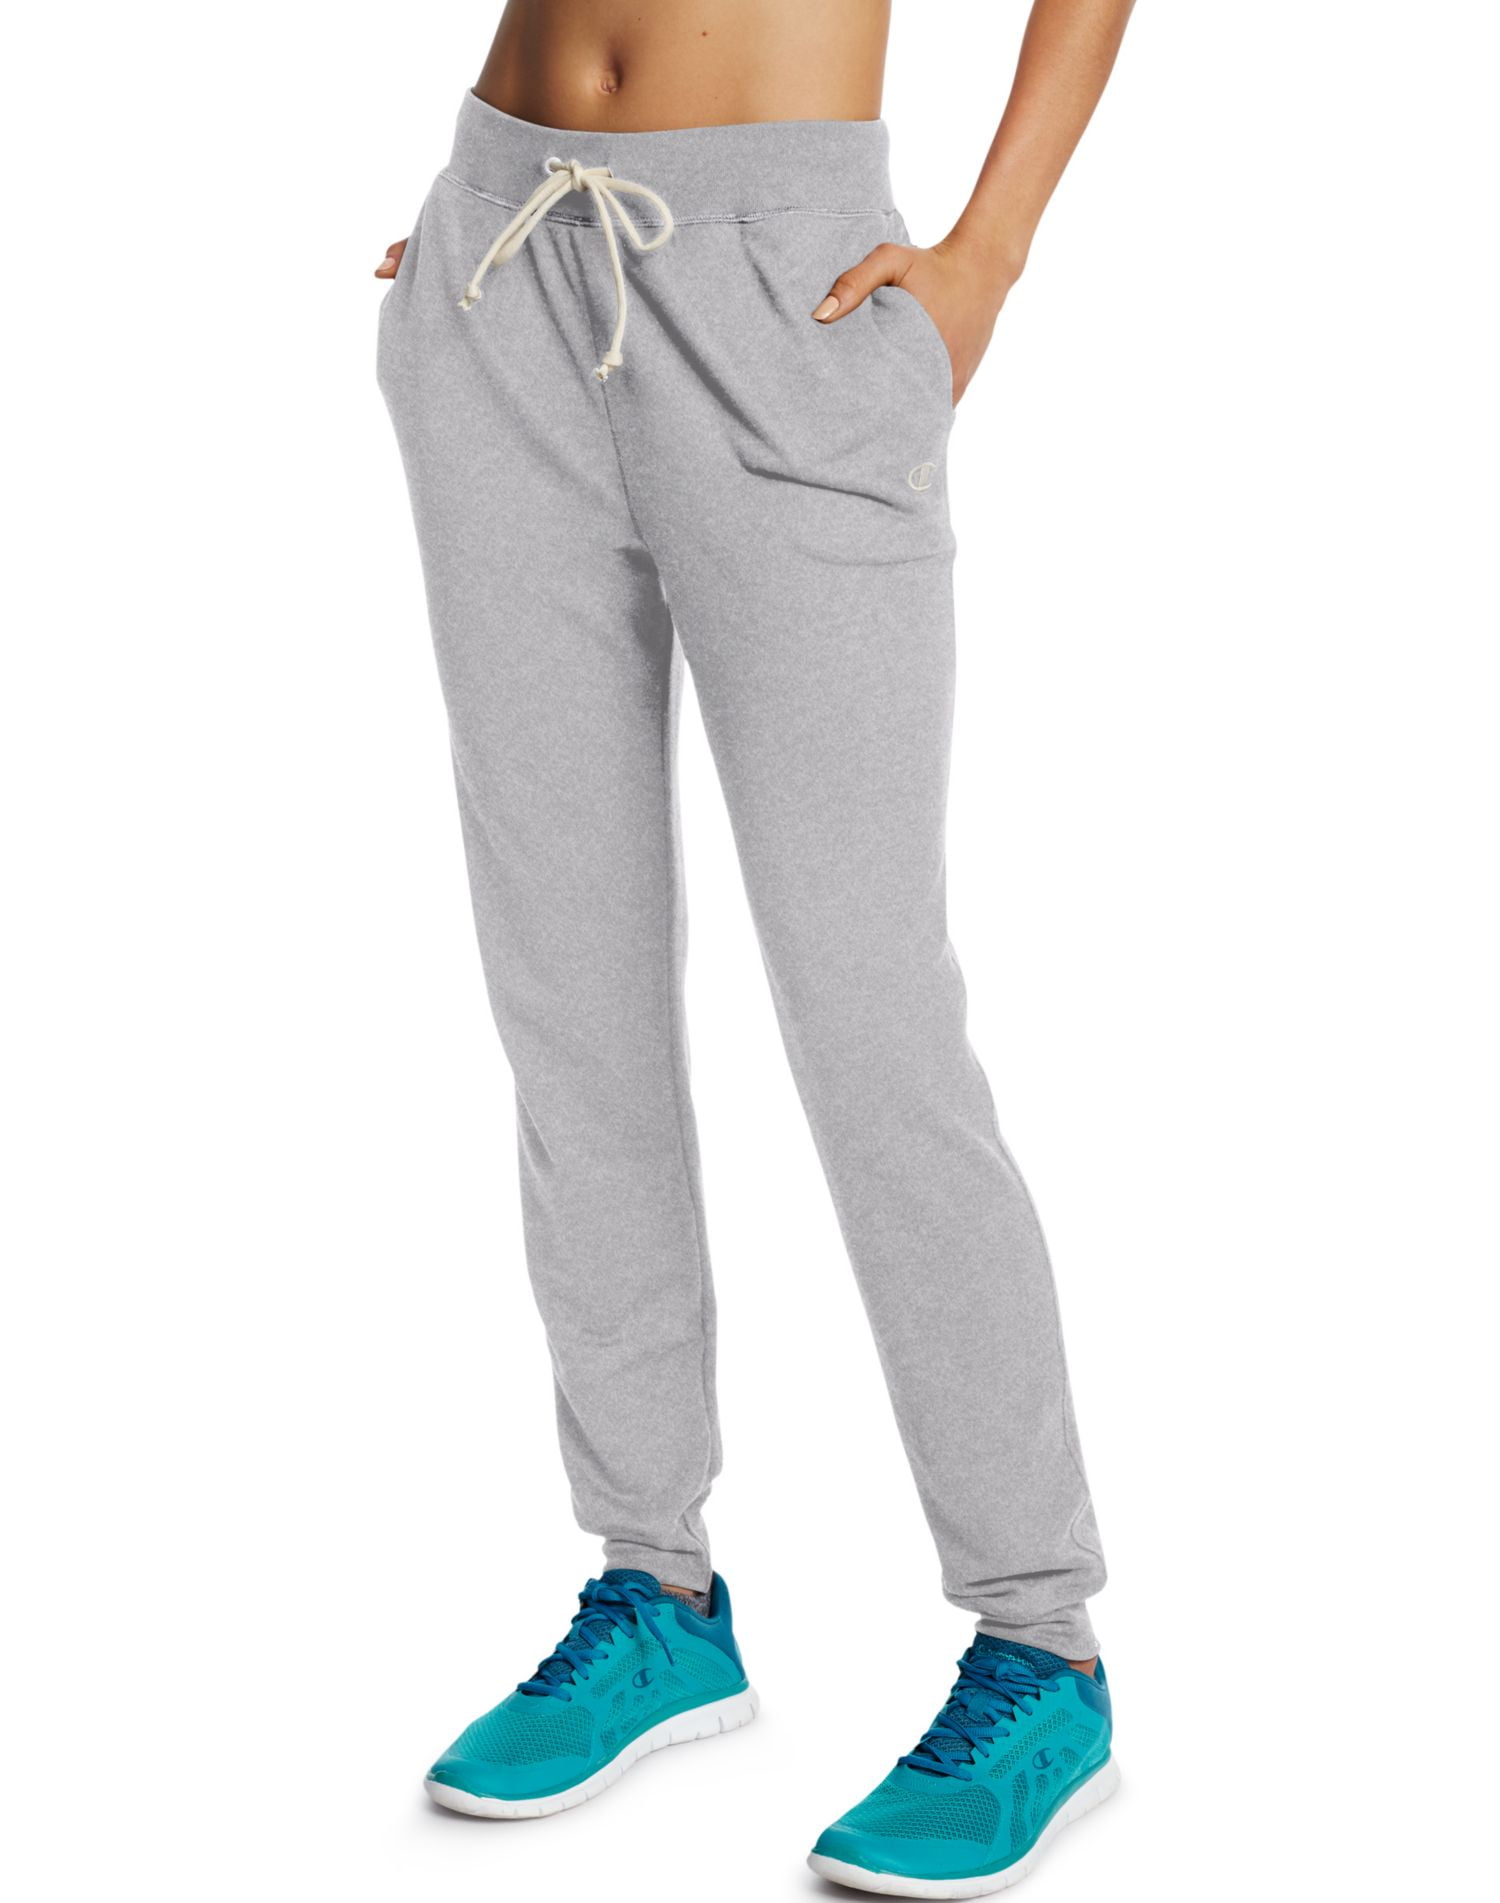 Champion Ladies' French Terry Jogger